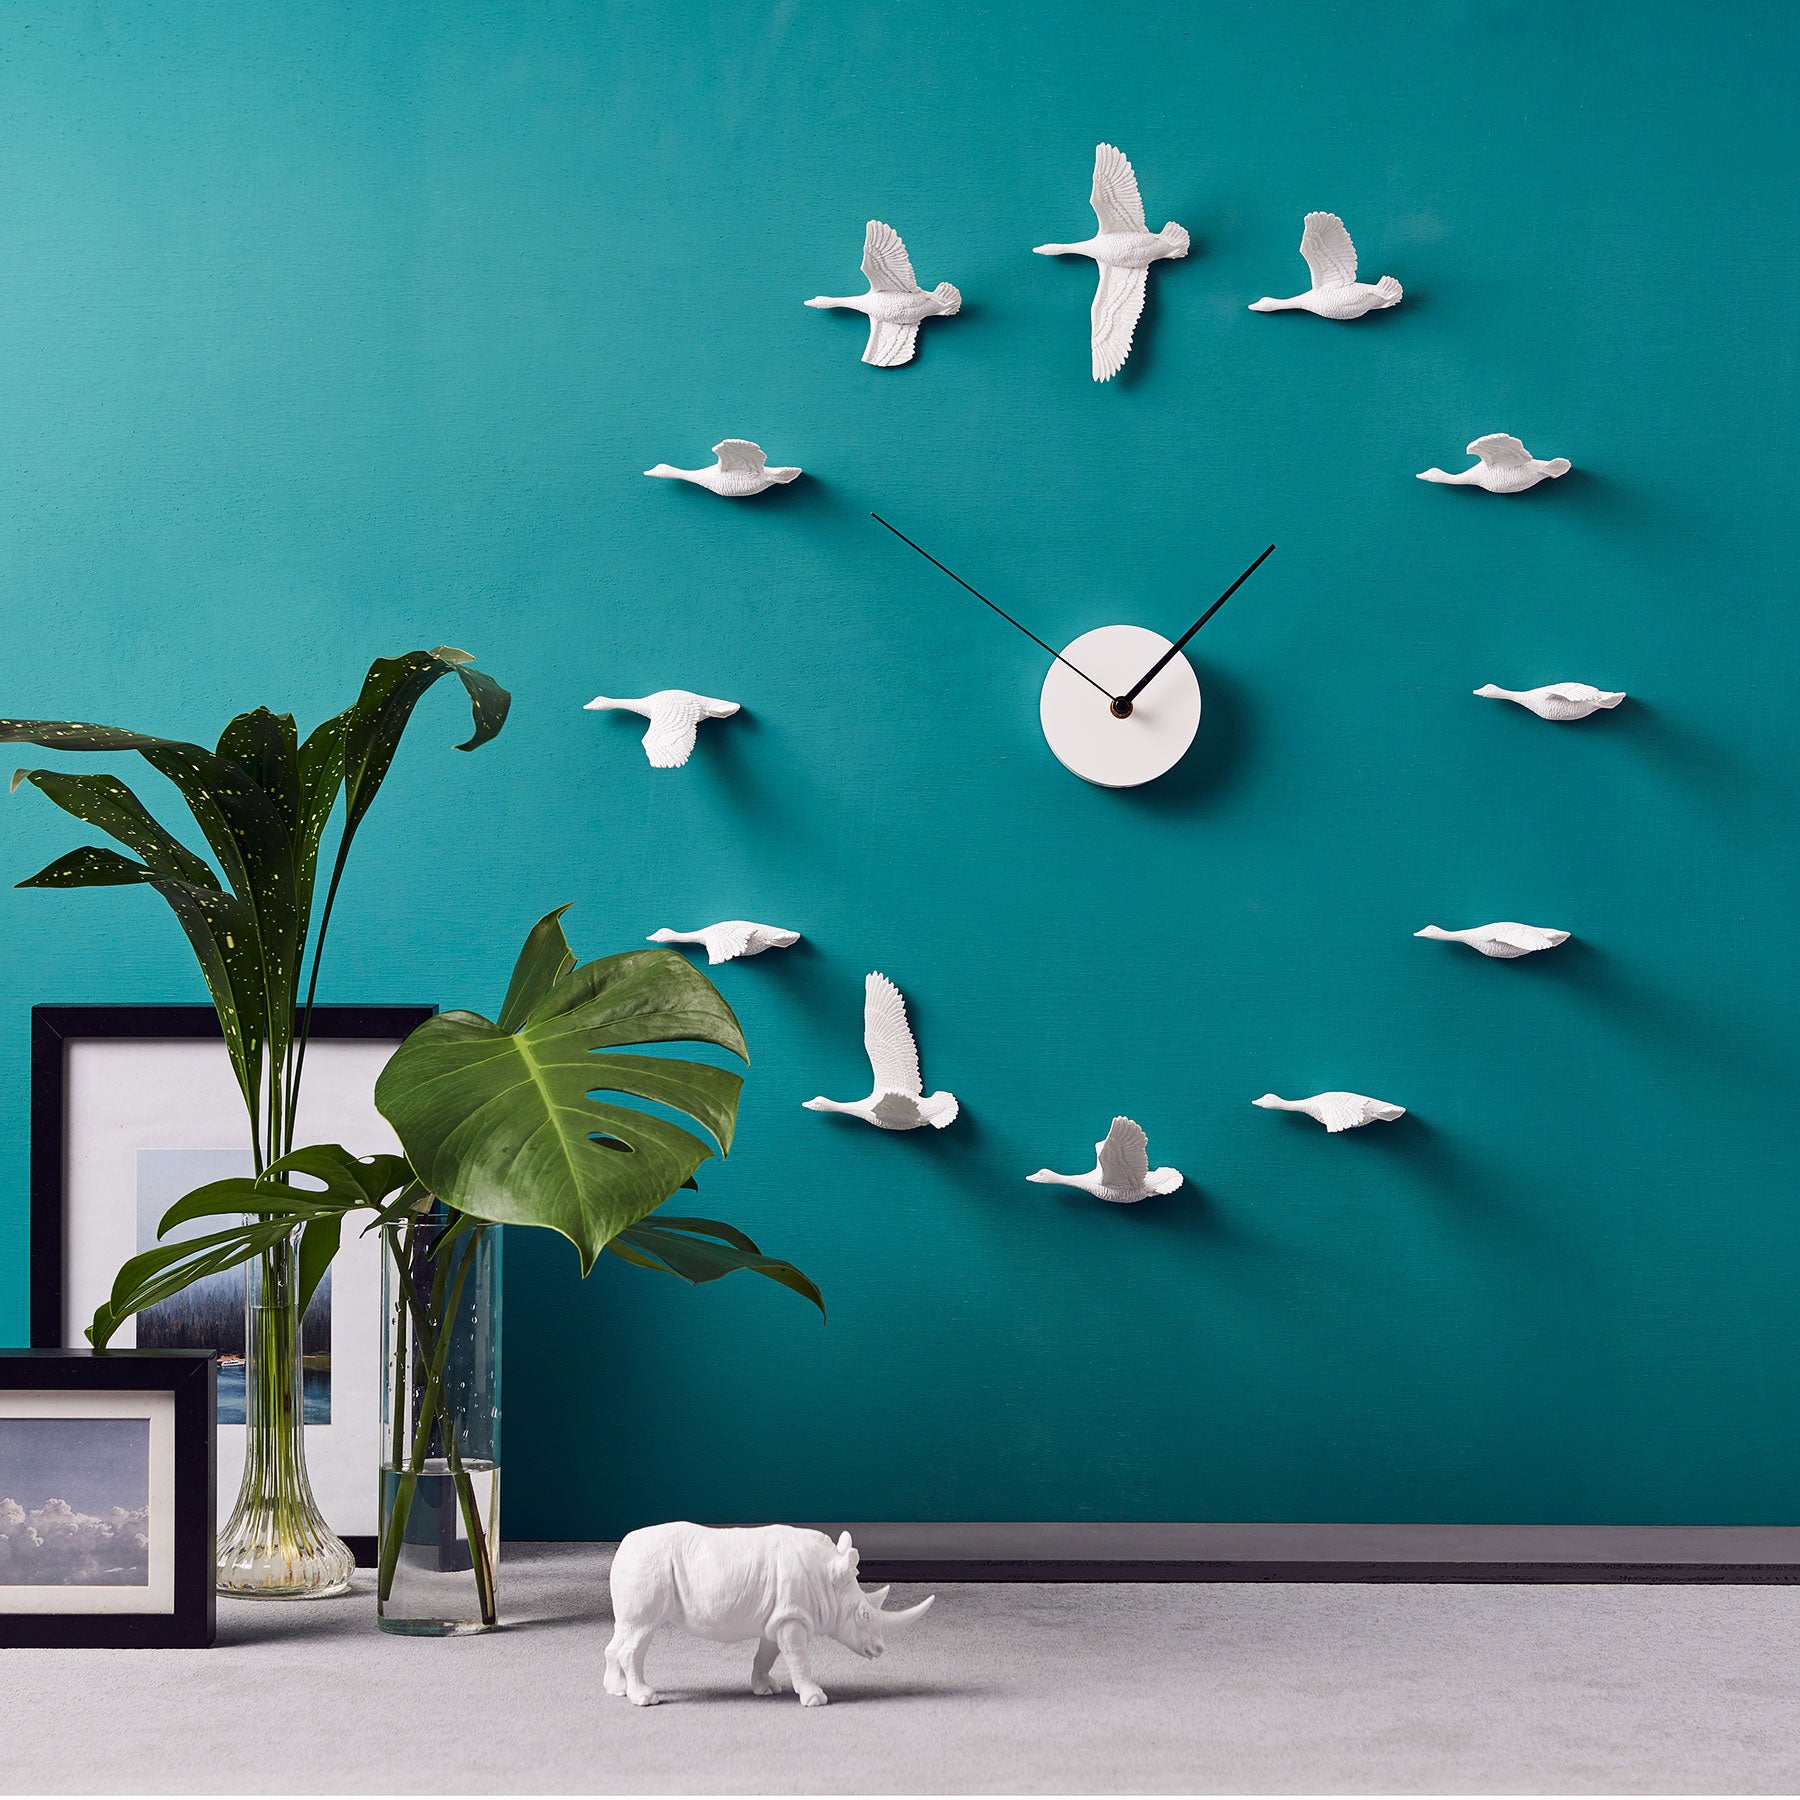 Migratory Birds Modern Wall Clock with Resin Sculpture Home Decor a Philosophical & Minimalist View Concept of the Time